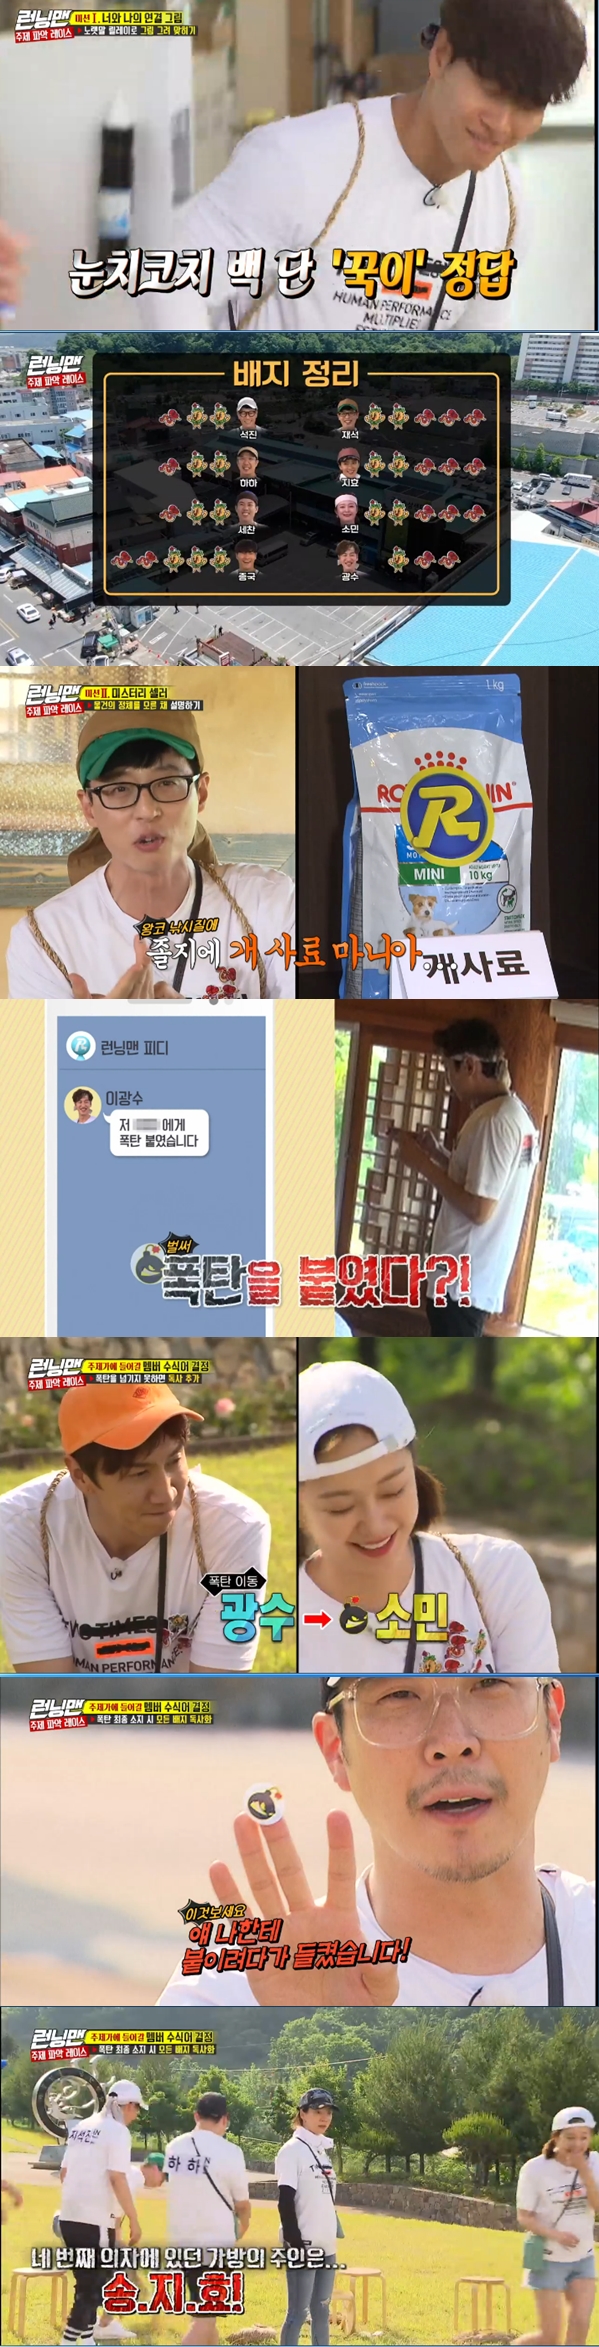 Song Ji-hyo was hit by a bomb fired by Jeon So-min.In the SBS entertainment program Running Man broadcasted on the afternoon of the 16th, Theme Identification Race was held to determine the members modifiers to enter the Running Man theme song to be called at the concert.The members gathered at the opening asked the crew to express each other in words or sentences that they thought of.Ji Suk-jin also provoked Kim Jong-kook by describing it as one-sided.Lee Kwang-soo and Yang Se-chan also laughed, describing Kim Jong-kook as a gangster.Jeon So-min described Yoo Jae-Suk as Baekdusan mouth and Ji Suk-jin as Jinah, dont cross that river, showing the official Running Man poet Down.The members who finished the presentation of words and sentences expressing each other asked the intention of the production team.The production team told the Running Man theme song that the modifiers expressed by the members today will go into the lyrics as they are.Members will be exchanging bombs with ginseng through Race today, and if the bombs are more than ginseng, the theme song will be humiliated.The members initially shared bombs and ginseng in a given bag.Yoo Jae-Suk, who chose the bomb, showed agility to hand over the bomb to Ji Suk-jin before he could perform his first mission.The members who were fighting for the bomb were divided into teams and played a team confrontation with the merchants.Members who teamed Lee Kwang-soo and Yang Se-chan as team leaders have brought one citizen from the market.The production team explained the game You and My Connection Picture which members and citizens will join together.When Lee Kwang-soo heard that he had to draw a picture, Lee Kwang-soo laughed at Yoo Jae-Suk, who could not make a picture of the usual picture, by saying firmly, Please hit the problem.The Yang Se-chan team failed in the first attempt without crossing the wall of The Hole Ji Suk-jin.Kim Jong-kook and Haha, who usually draw well, painted a person who eats alone in accordance with the correct answer I am alone.However, Ji Suk-jin was blank for 6 of the 10 seconds given, and then he painted only one note and bought the team members cause.In the end, Yang Se-chan, who had to answer the correct answer, failed to catch the feeling.In the second attempt, Ji Suk-jin did not make any Lizzy due to Lee Kwang-soos interruption, but Haha and Kim Jong-kook succeeded in getting Kim Gun-mos wrong meeting.The Lee Kwang-soo team, which then challenged, was a total impasse.Lee Kwang-soo, who had to draw the lyrics for Lim Jae-bums For You in the first period, sent the painting The Hole Yoo Jae-Suk to the right answer, but the painting eventually became a mess.Yoo Jae-Suk looked at the picture and thought for a long time, but eventually failed to get the right answer.In the second period when Yoo Jae-Suk painted, Lee Kwang-soo team lost because Jeon So-min knew the correct answer and could not get the title of the song.Meanwhile, during the first round game, Ji Suk-jin succeeded in moving the bomb to Lee Kwang-soo.Upon starting, Ji Suk-jin, who was hit by Yoo Jae-Suk, moved the bomb to Lee Kwang-soo shoes.After the first round, the crew informed them that the bomb had been moved, and the members worried that it would have been transferred to them.However, Lee Kwang-soo did not recognize that he had a bomb, and after an hour of time limit, Lee Kwang-soo received a poison badge.Lee Kwang-soo was not focused on recording, knowing that a viper badge had been added to him.Lee Kwang-soo was restless when the crew said that if the bomb is not moved, a viper badge will be created.But in the end, Lee Kwang-soo participated in the second round game without any success.The second round game was explaining without knowing the identity of the item: the members were divided into two teams and selling the item without knowing what it was.Yoo Jae-Suk and Haha had to sell dog food, and the two laughed at the dog food, saying, Why did we become a Dasan king?But the winner of the second round team went to the Kim Jong-kook Song Ji-hyo team, who specifically described the diapers; the two drove the viper badge to Ji Suk-jin.Meanwhile, during lunch Lee Kwang-soo moved the bomb to Jeon So-min.Lee Kwang-soo, who had already passed the limit time and received two viper badges, found the bomb on his shoe and moved it to Jeon So-min.Jeon So-min was not focused on recording, as Lee Kwang-soo did in the second round after hearing the bomb had been handed over to him.But Jeon So-min eventually found the bomb Lee Kwang-soo hid in a sticker on his cell phone.She peeked at the opportunity to return the bomb to Lee Kwang-soo but when she couldnt help it approached Haha.Haha noticed this, however, and Jeon So-min tried and failed to other members.Desperate, Jeon So-min bombed a bag at the last minute, and the main character of the bag was Song Ji-hyo.Song Ji-hyo, who kept the first place, was still and was hit, and Yoo Jae-Suk took the first place in Race.